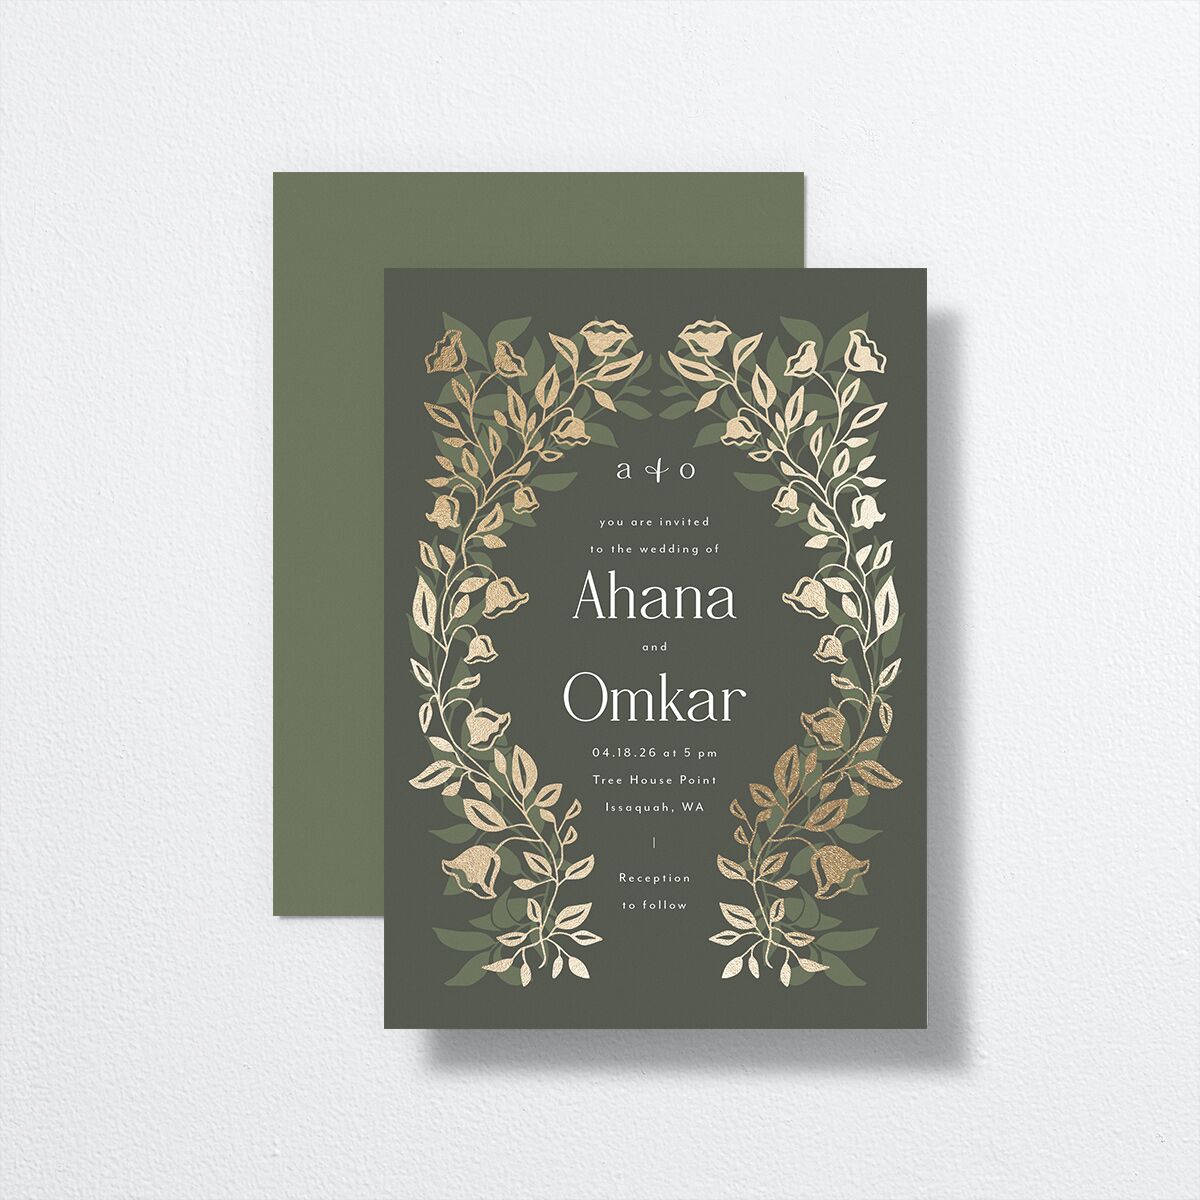 Rustic Nouveau Wedding Invitations front-and-back in green